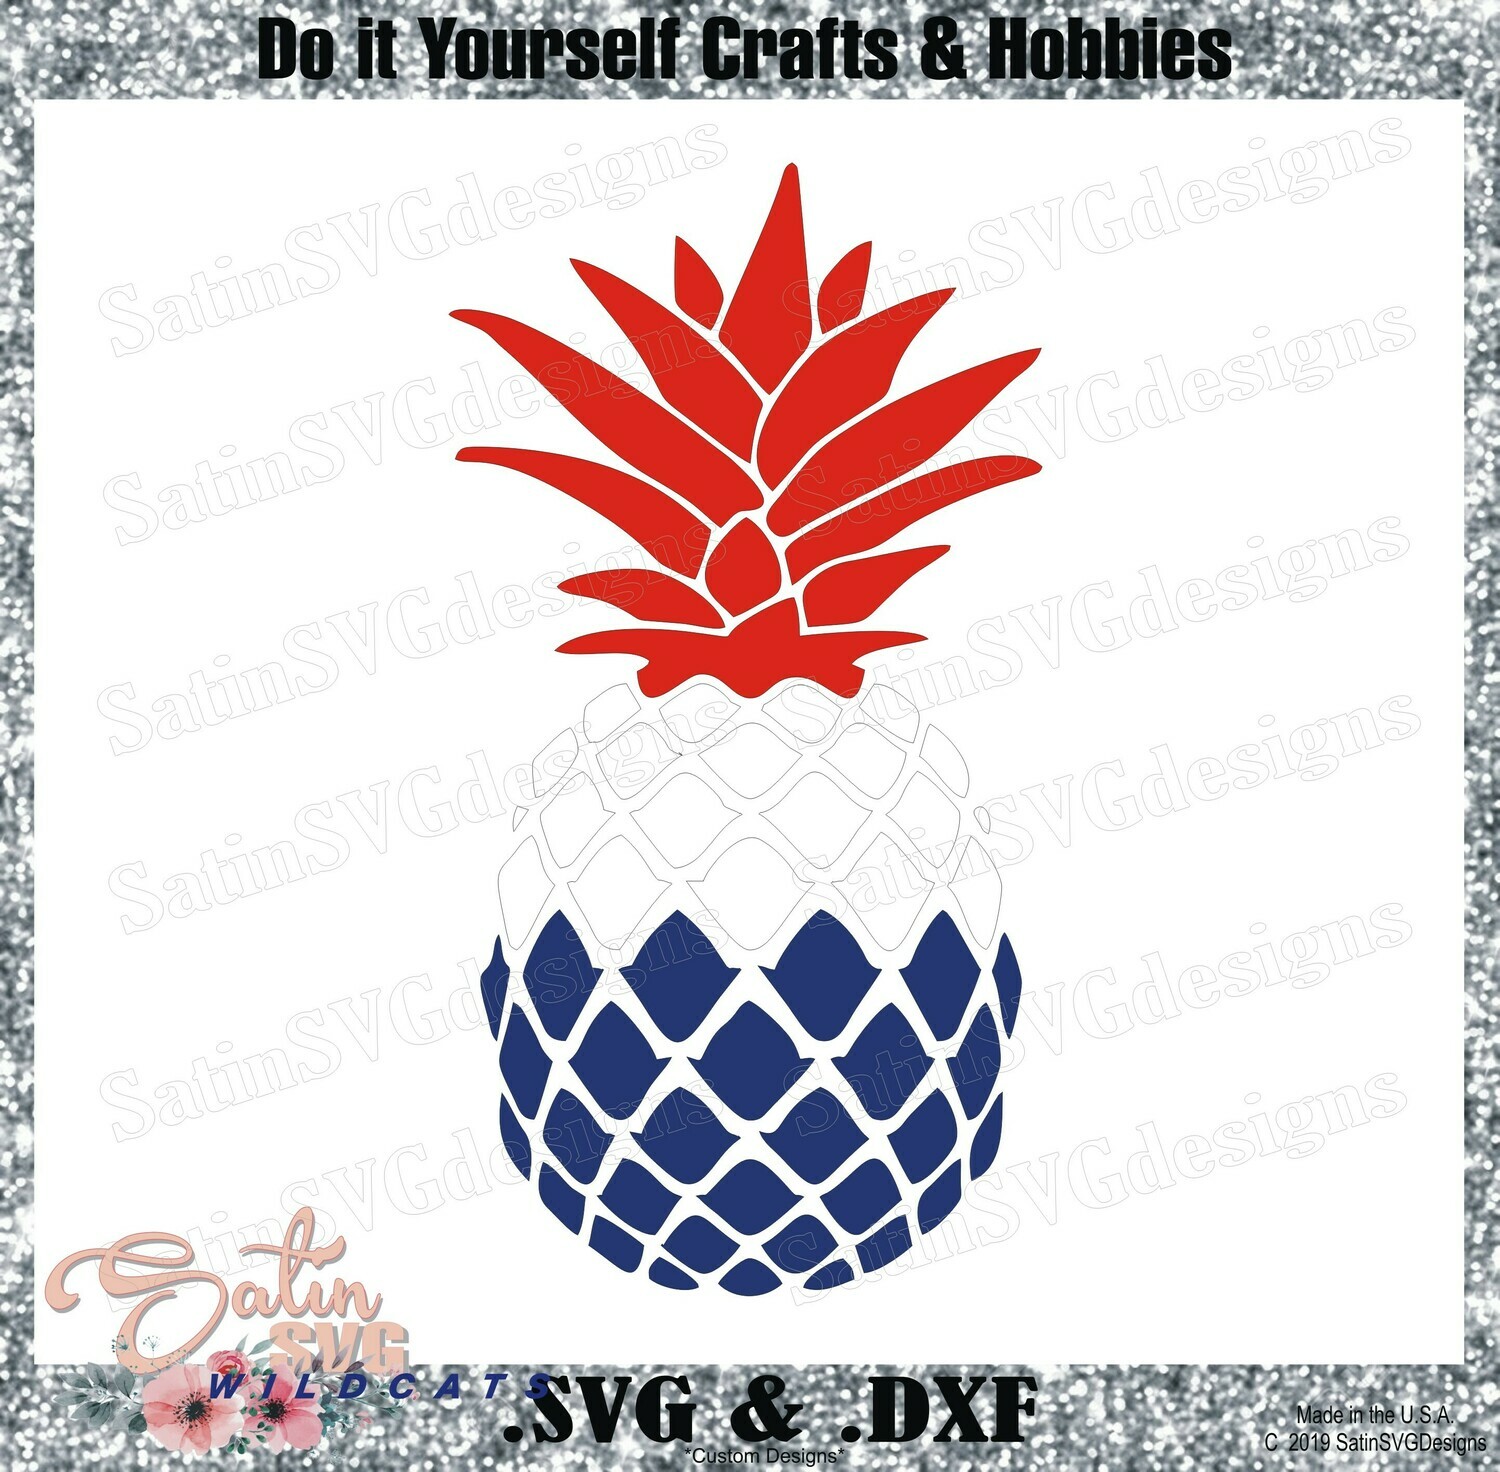 Download Pineapple Red White And Blue Designs Svg Files Cricut Silhouette Studio Digital Cut Files